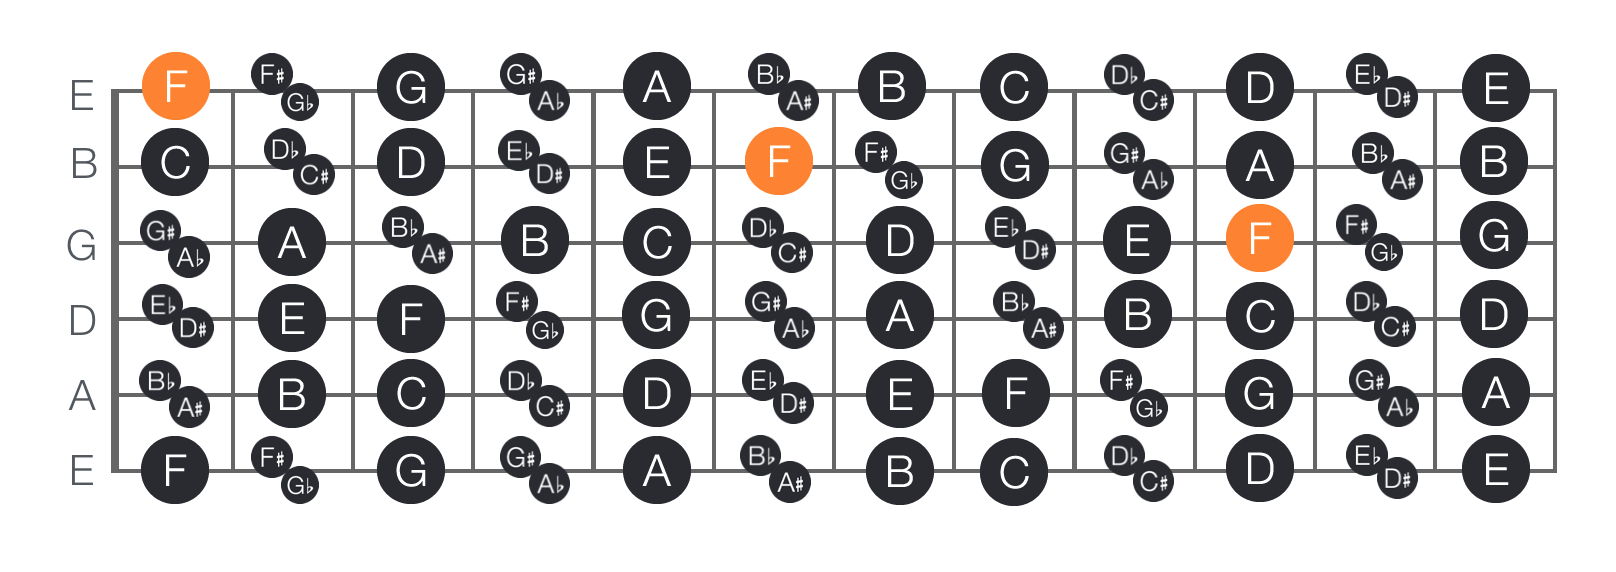 How to find & memorise the notes on the guitar fretboard ...